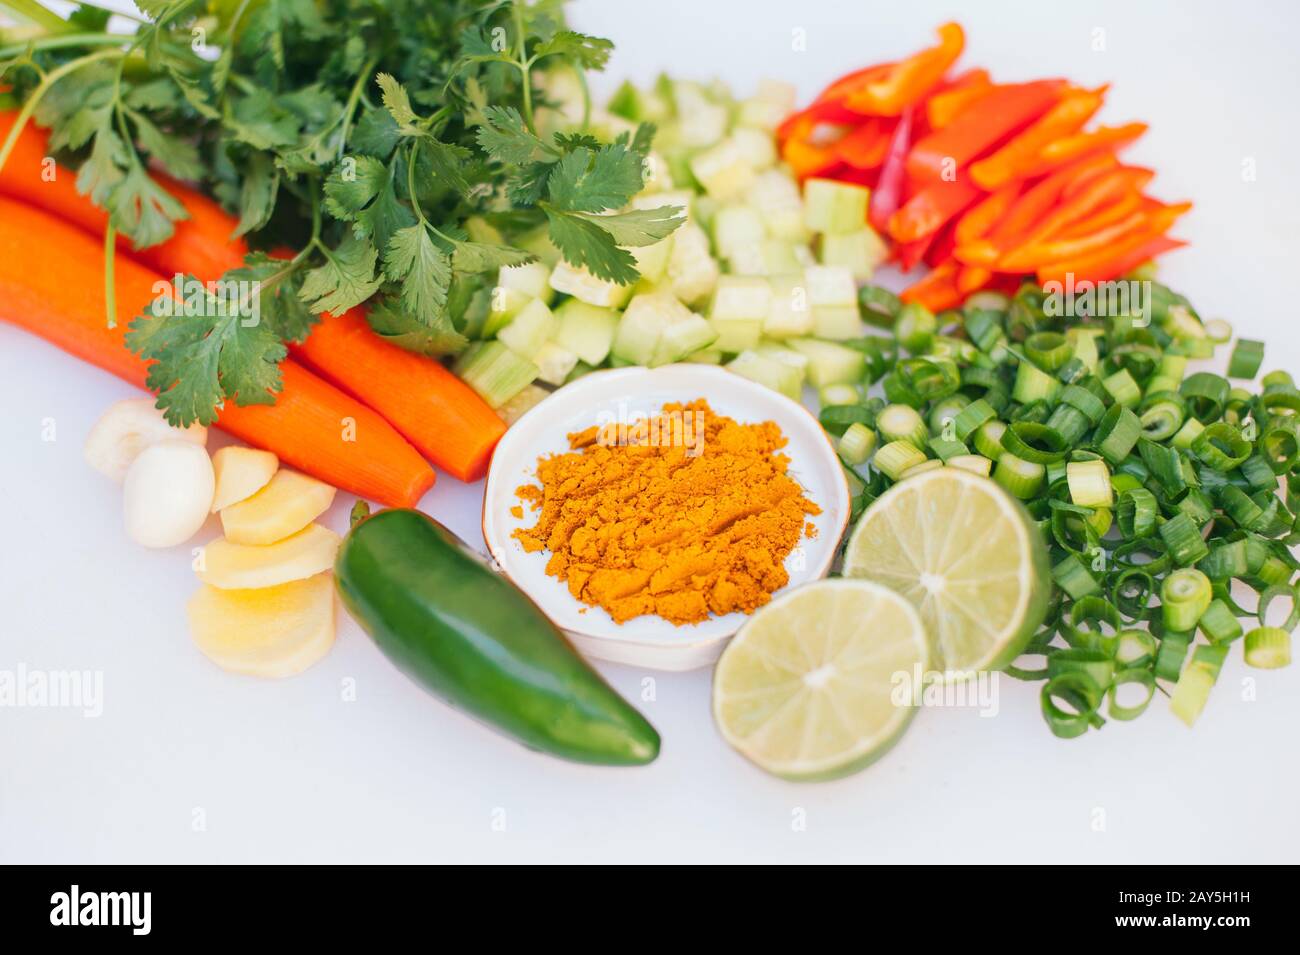 Fresh vegetable assortment on white background. Greenery, cut limes, pepper, carrot, cucumber and lime. Healthy nutrition concept. Vegeterian products Stock Photo